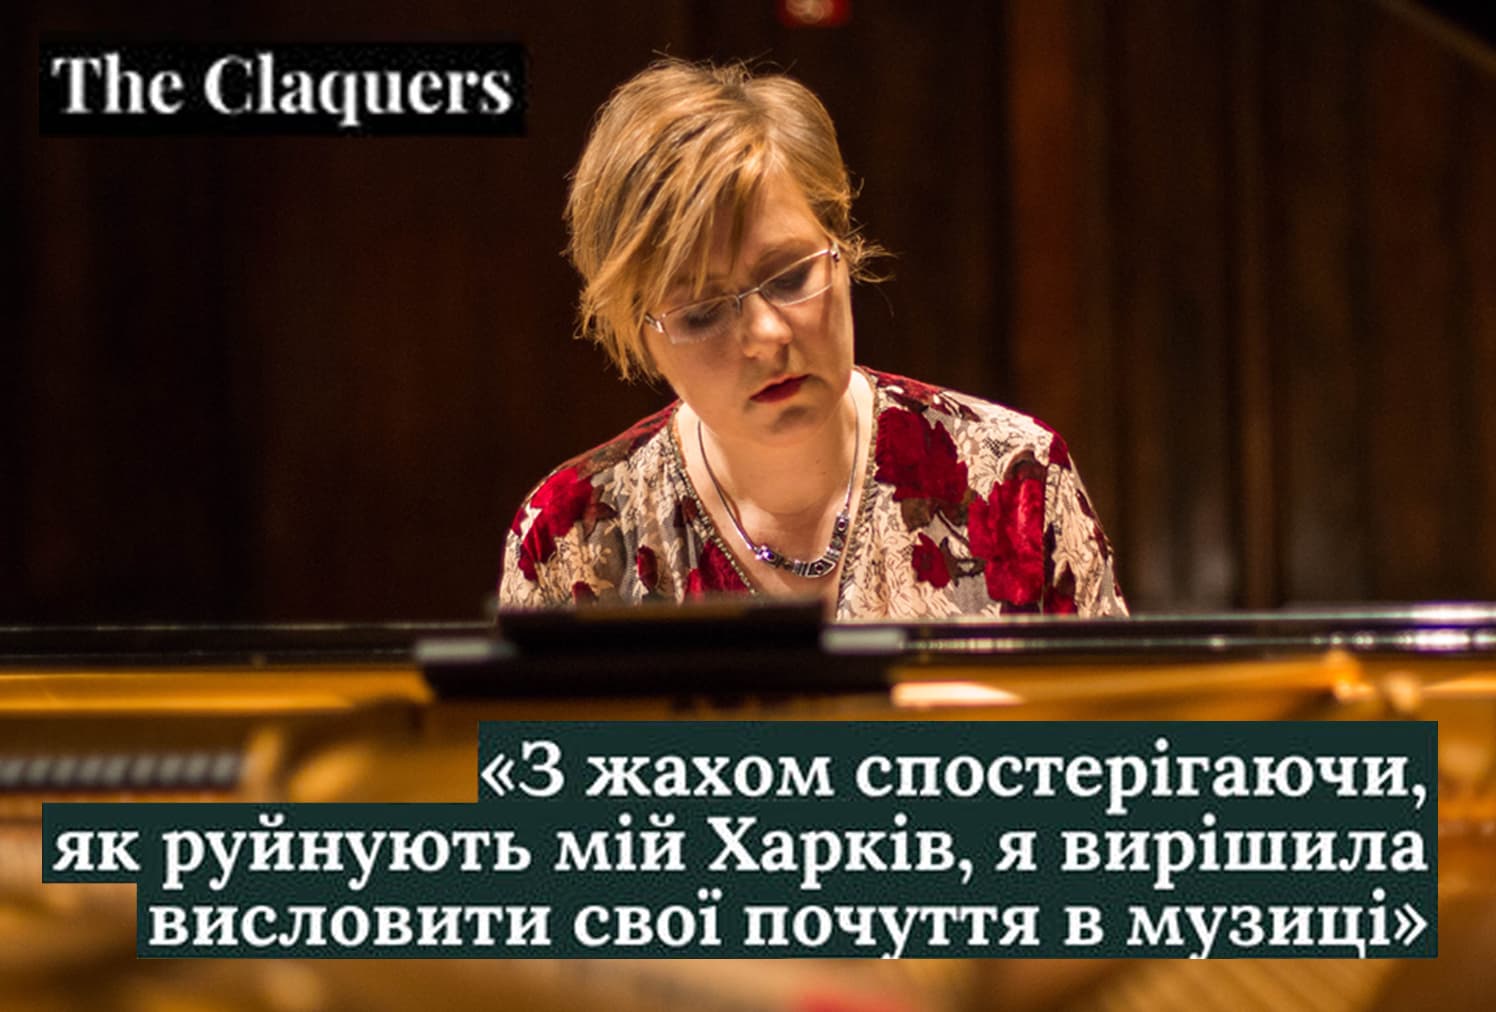 thumb - Thank you, "The Claquers" (in Kyiv) for this great feature about my new album